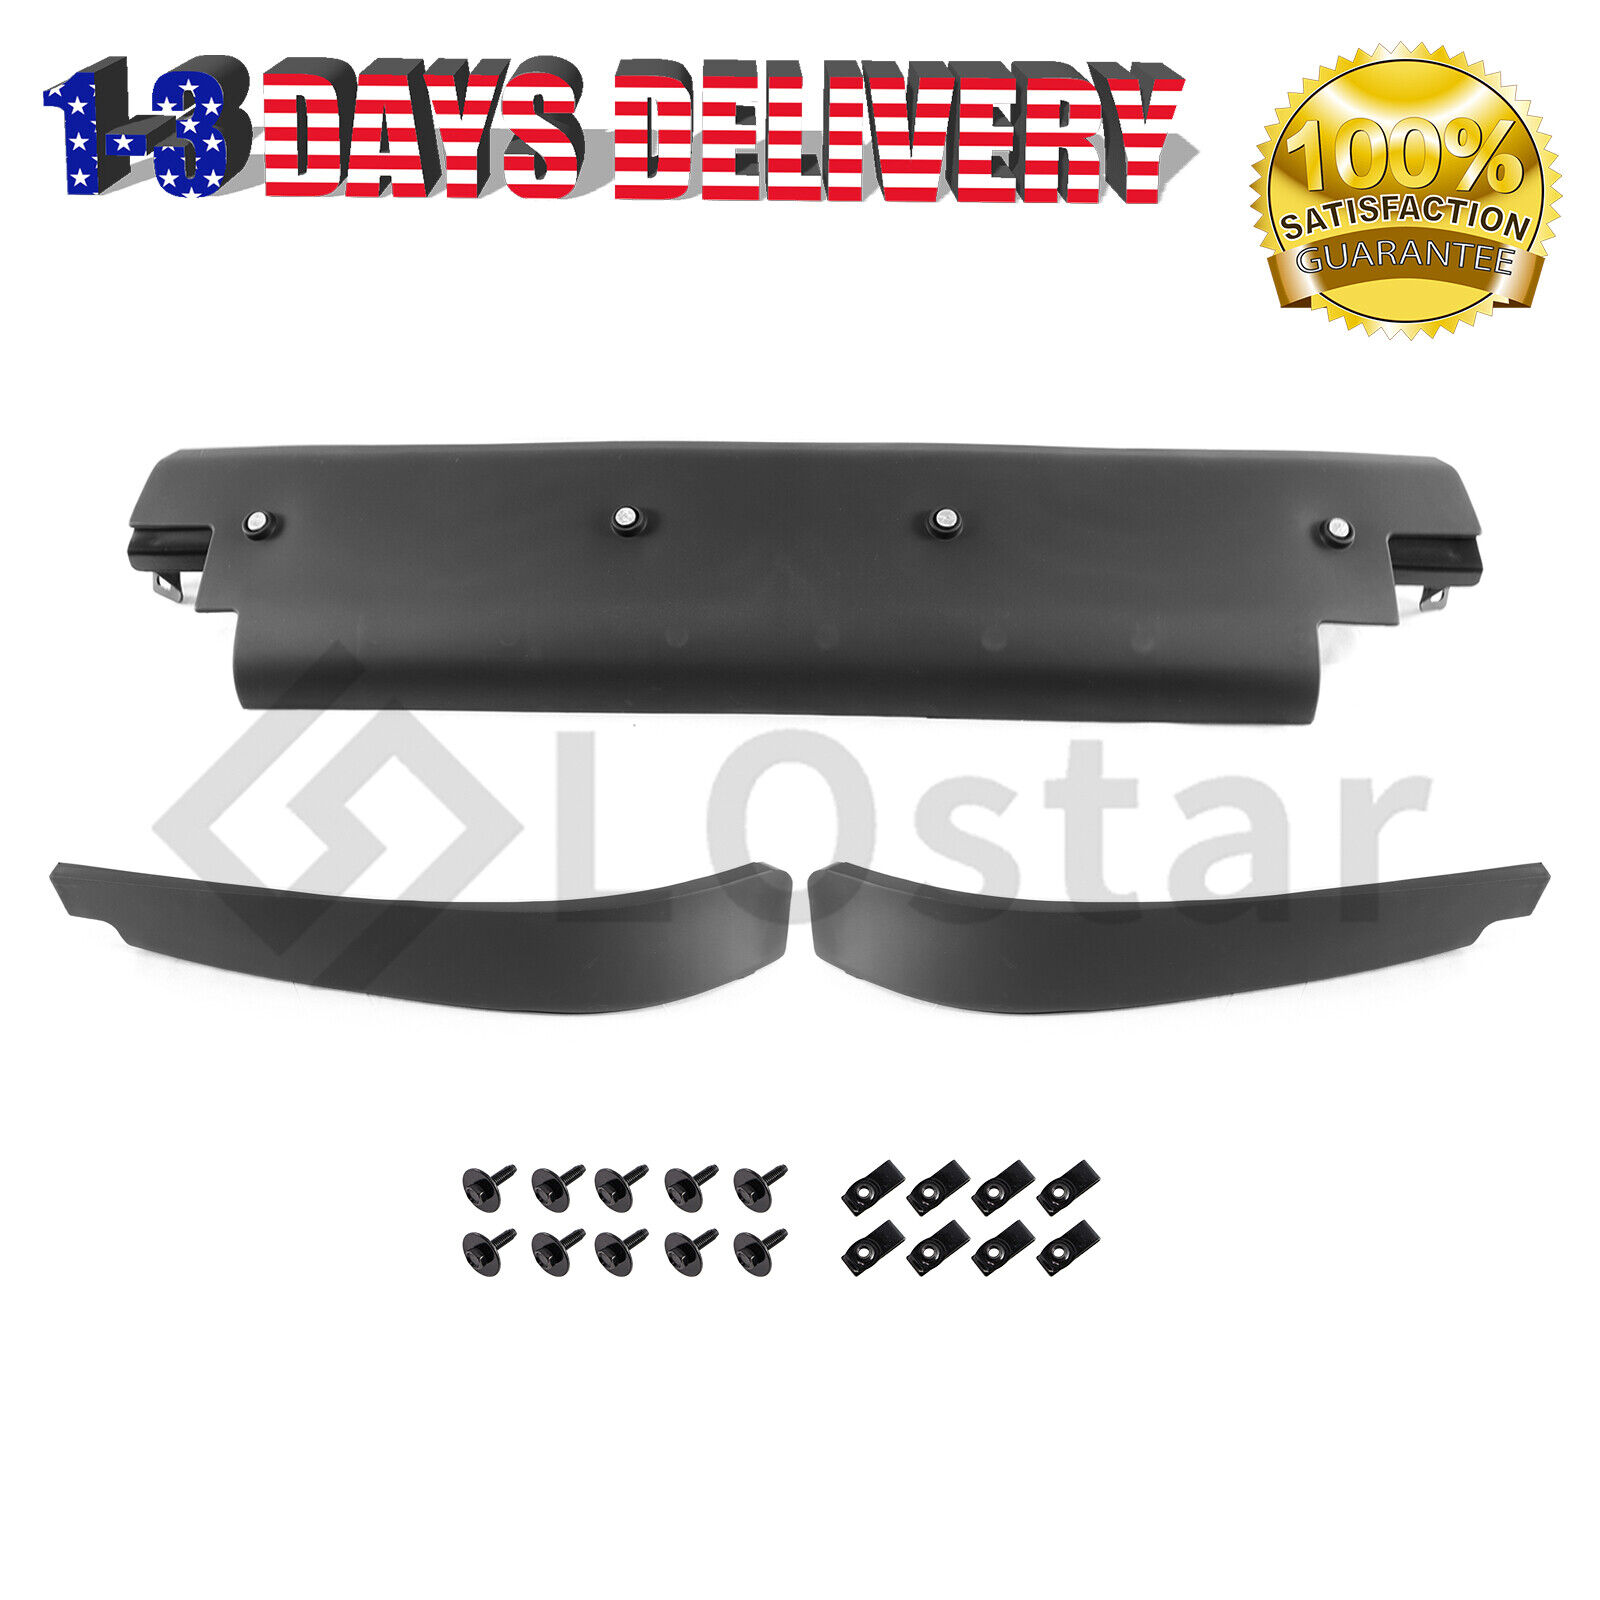 Front Spoiler Air Dam 3 Piece Kit With Mount Hardware For 97-04 Corvette LS1 LS6